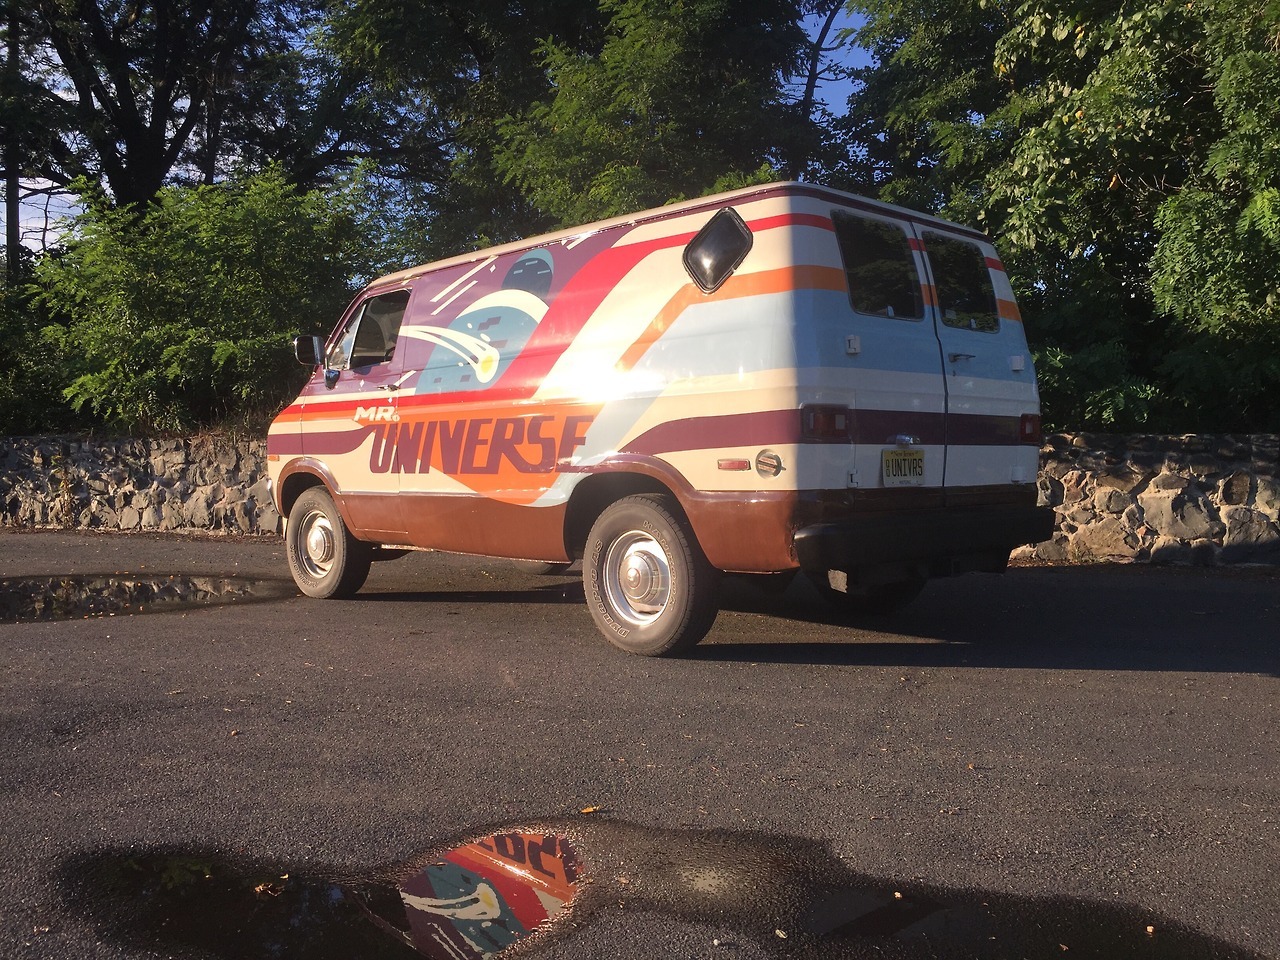 cosplaymutt: “ As promised, here are the pictures of the van now that the graphics are done! Still needs a tone of work mechanically and on the interior, but aside from wheels and a few other tiny...